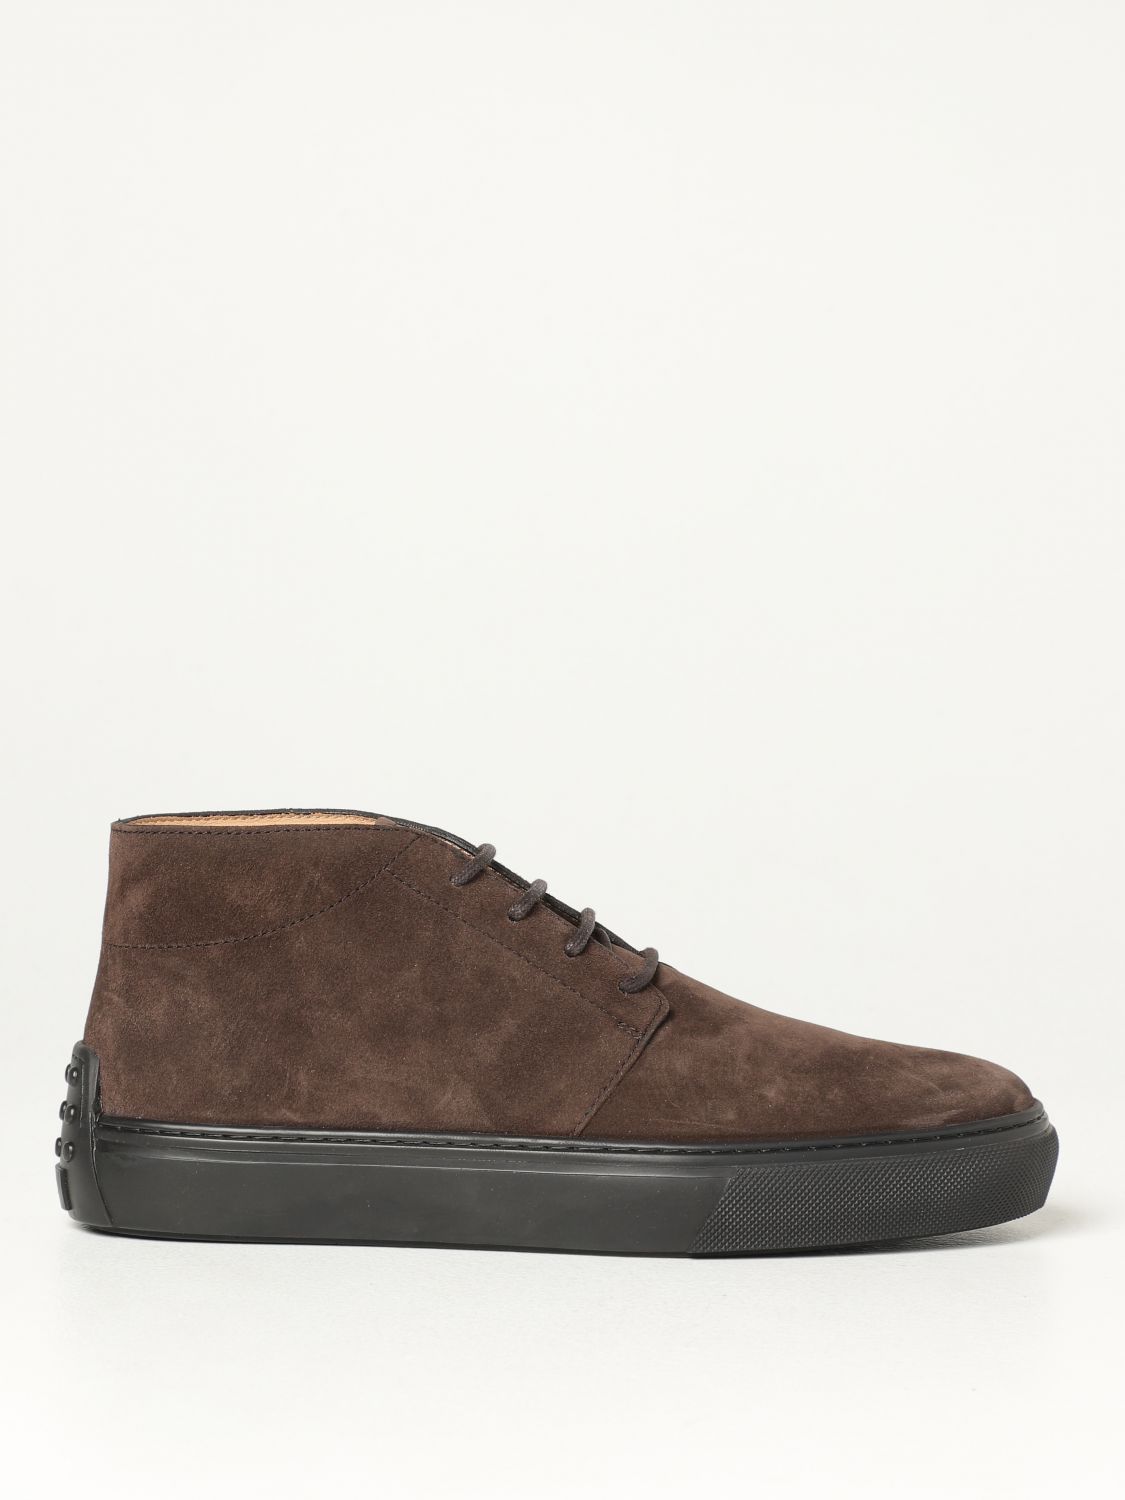 Desert boots Tod's: Tod's ankle boot in suede dark 1